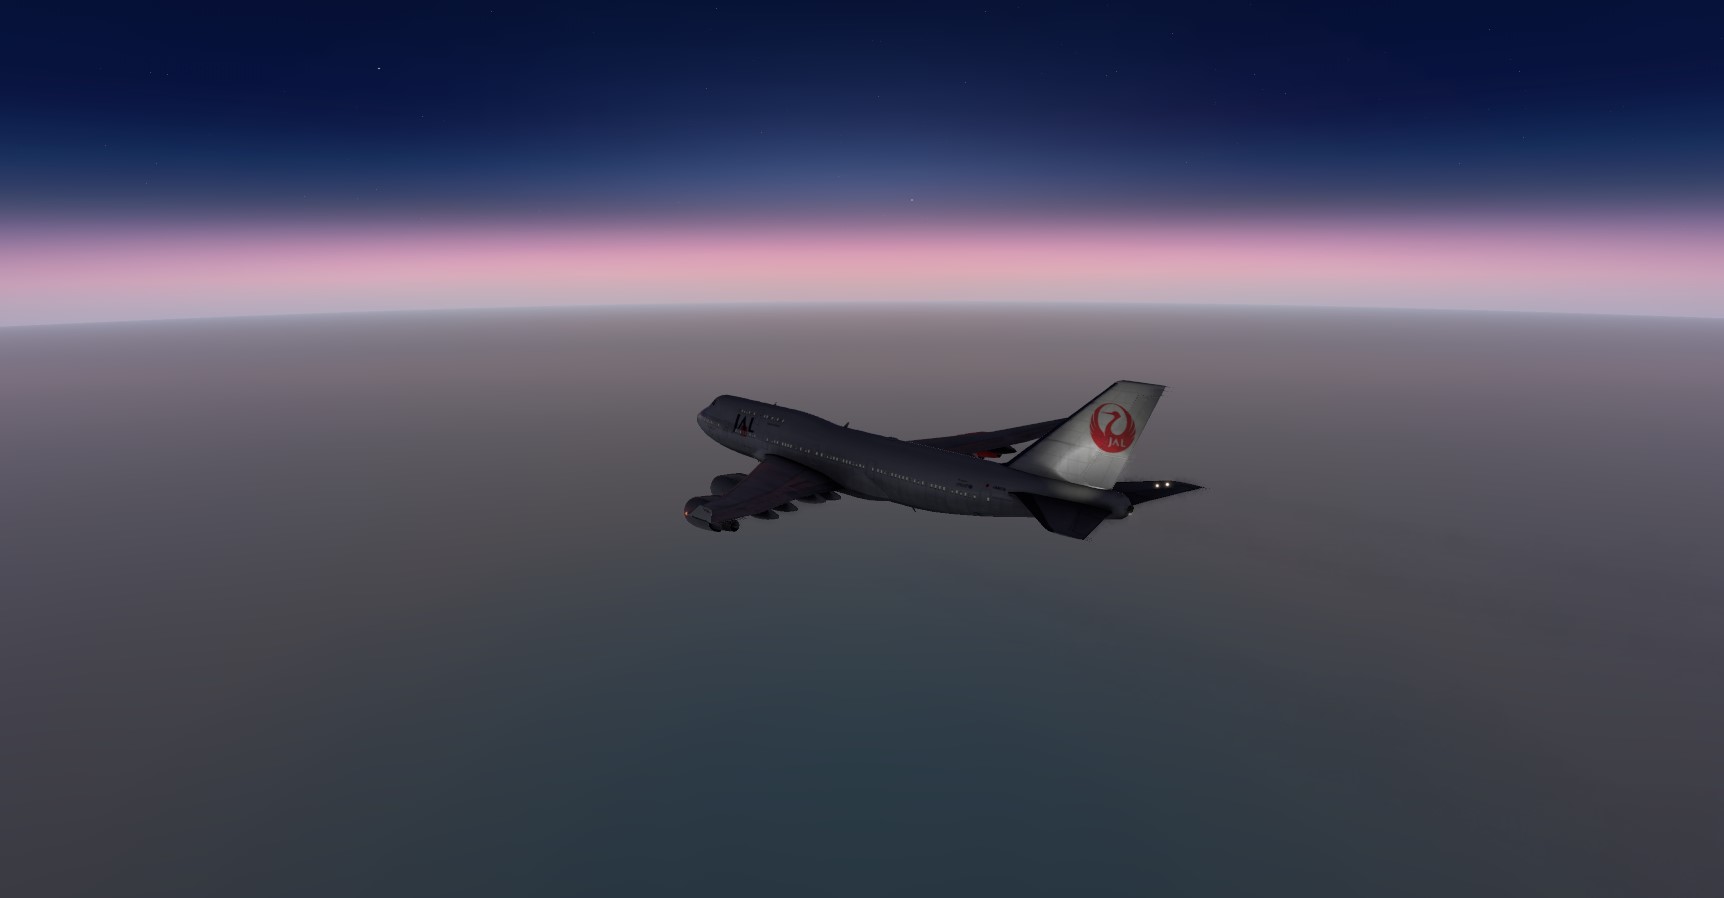 Just about sunrise over the pacific